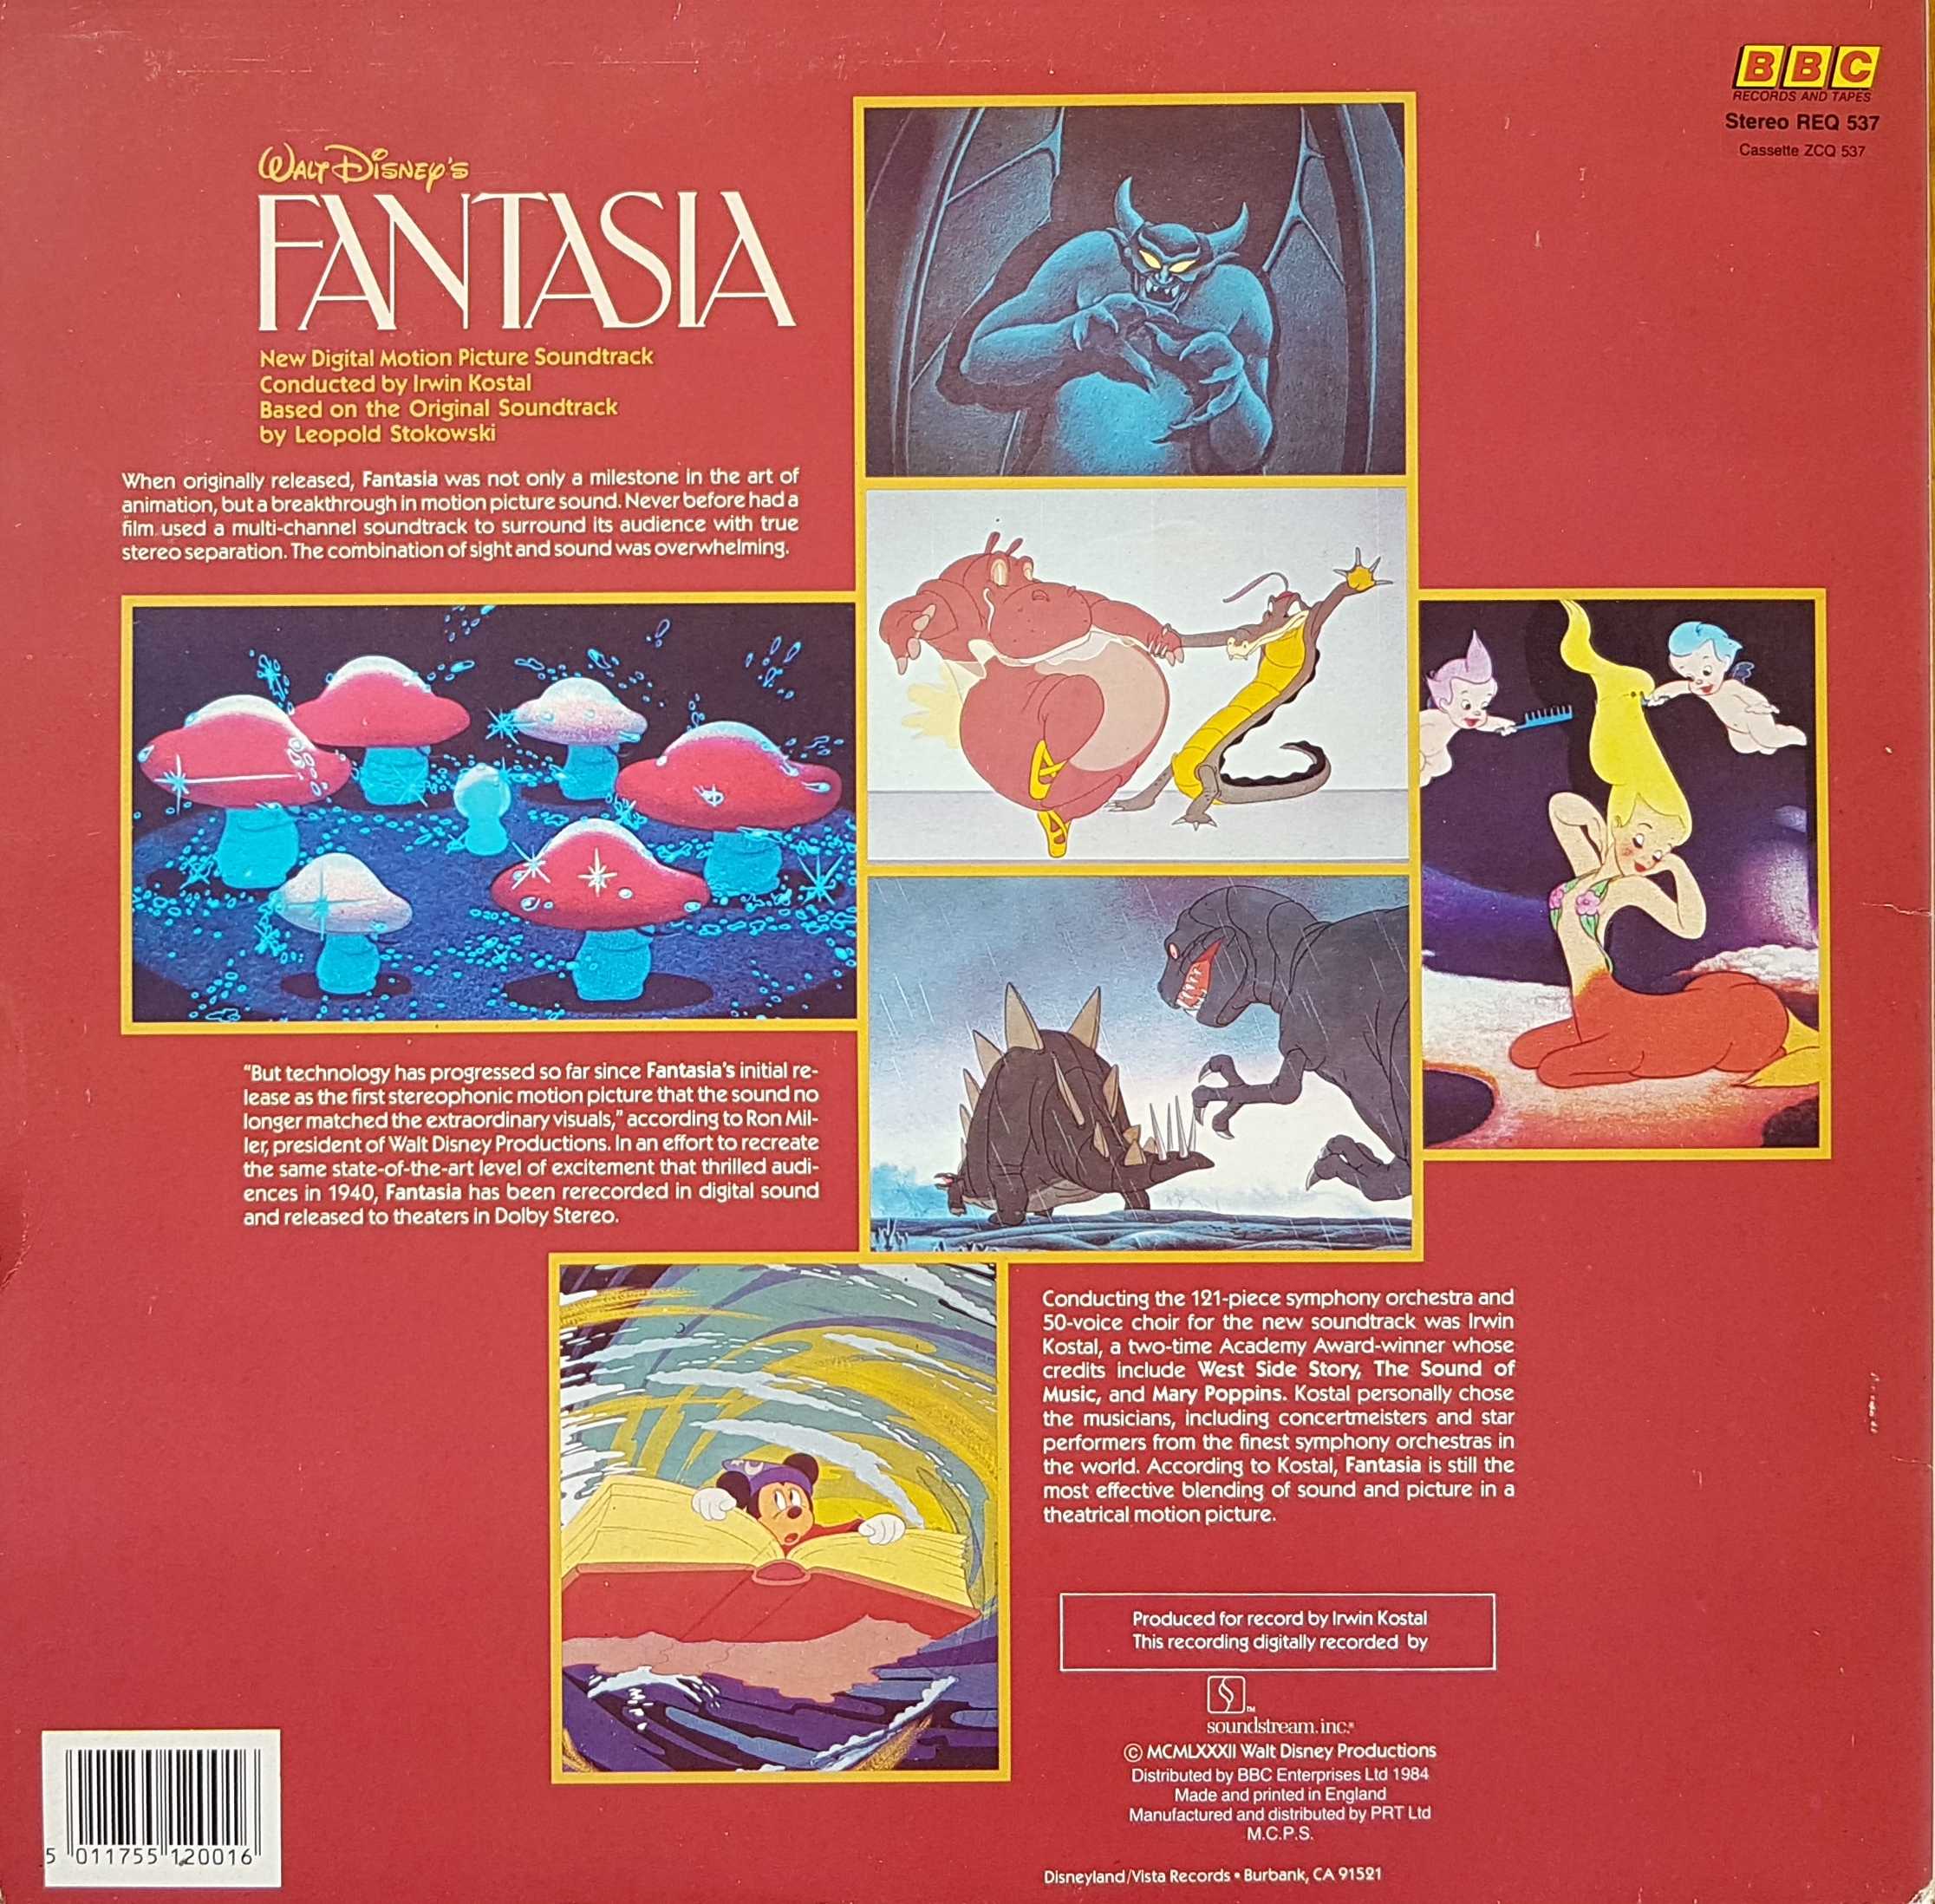 Picture of REQ 537 Fantasia by artist Various from the BBC records and Tapes library